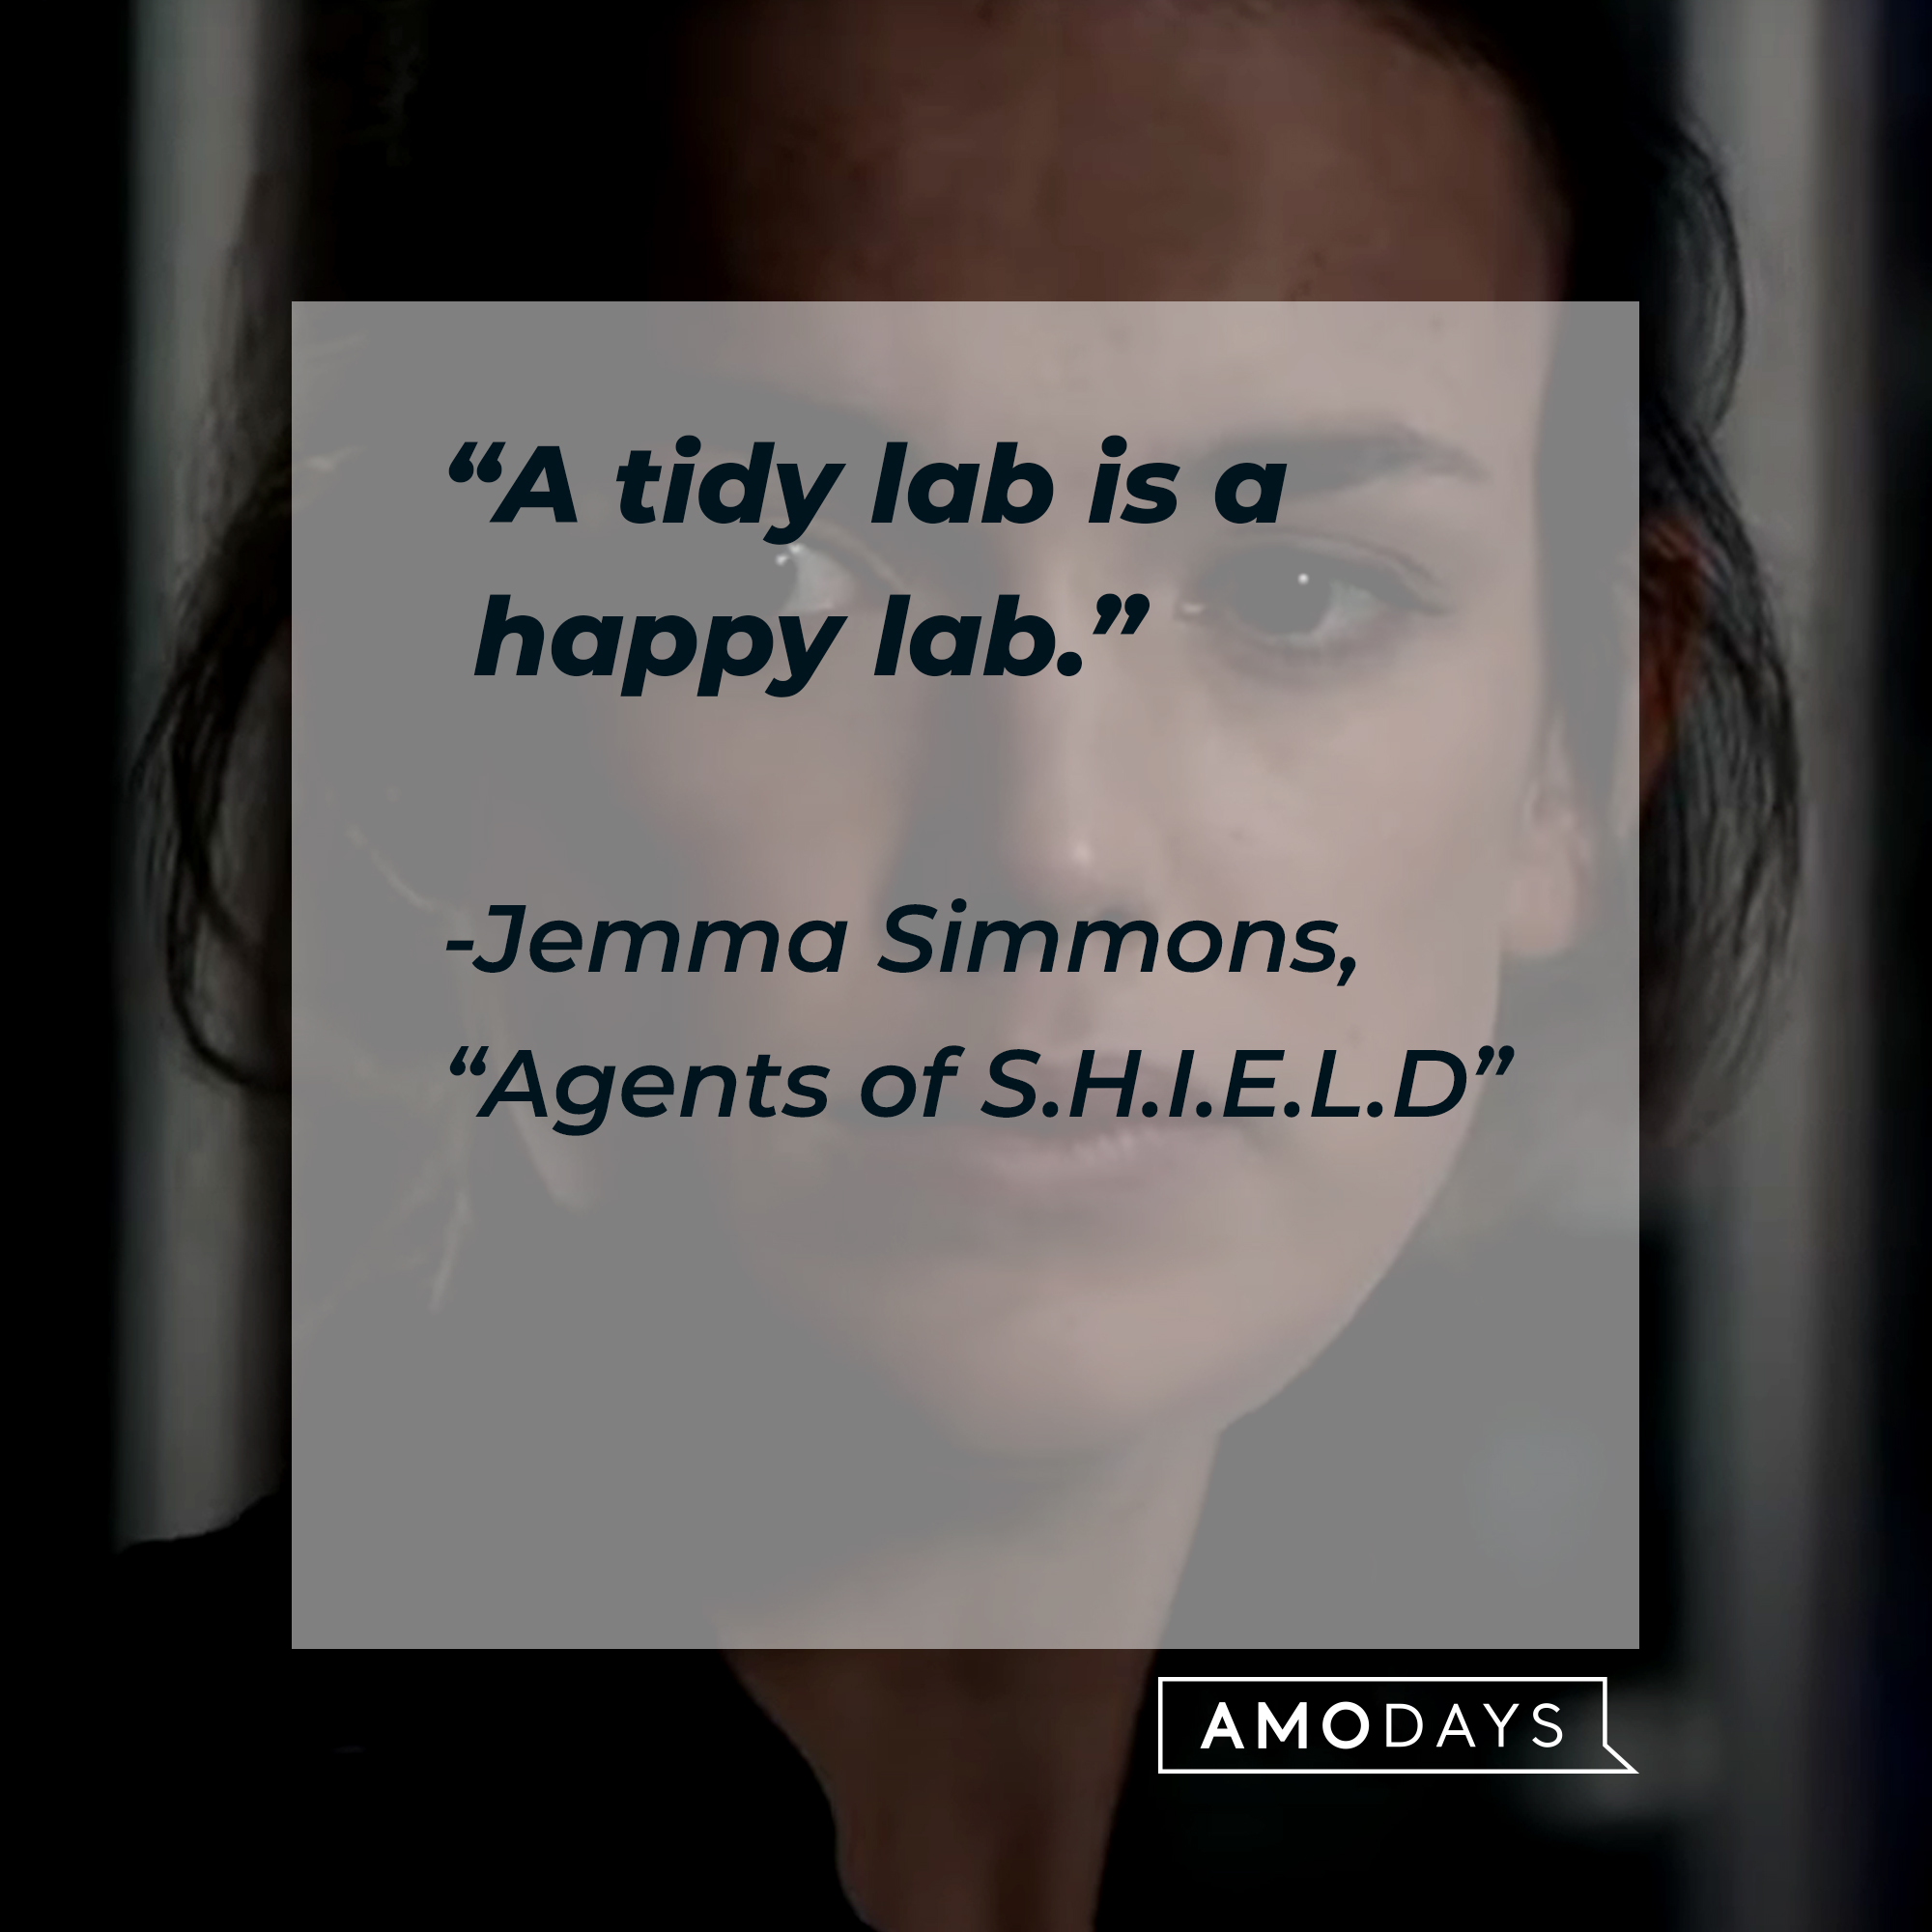 Jemma Simmons with her quote from "Agents of S.H.I.E.L.D.:" “A tidy lab is a happy lab.” | Source: Facebook.com/AgentsofShield